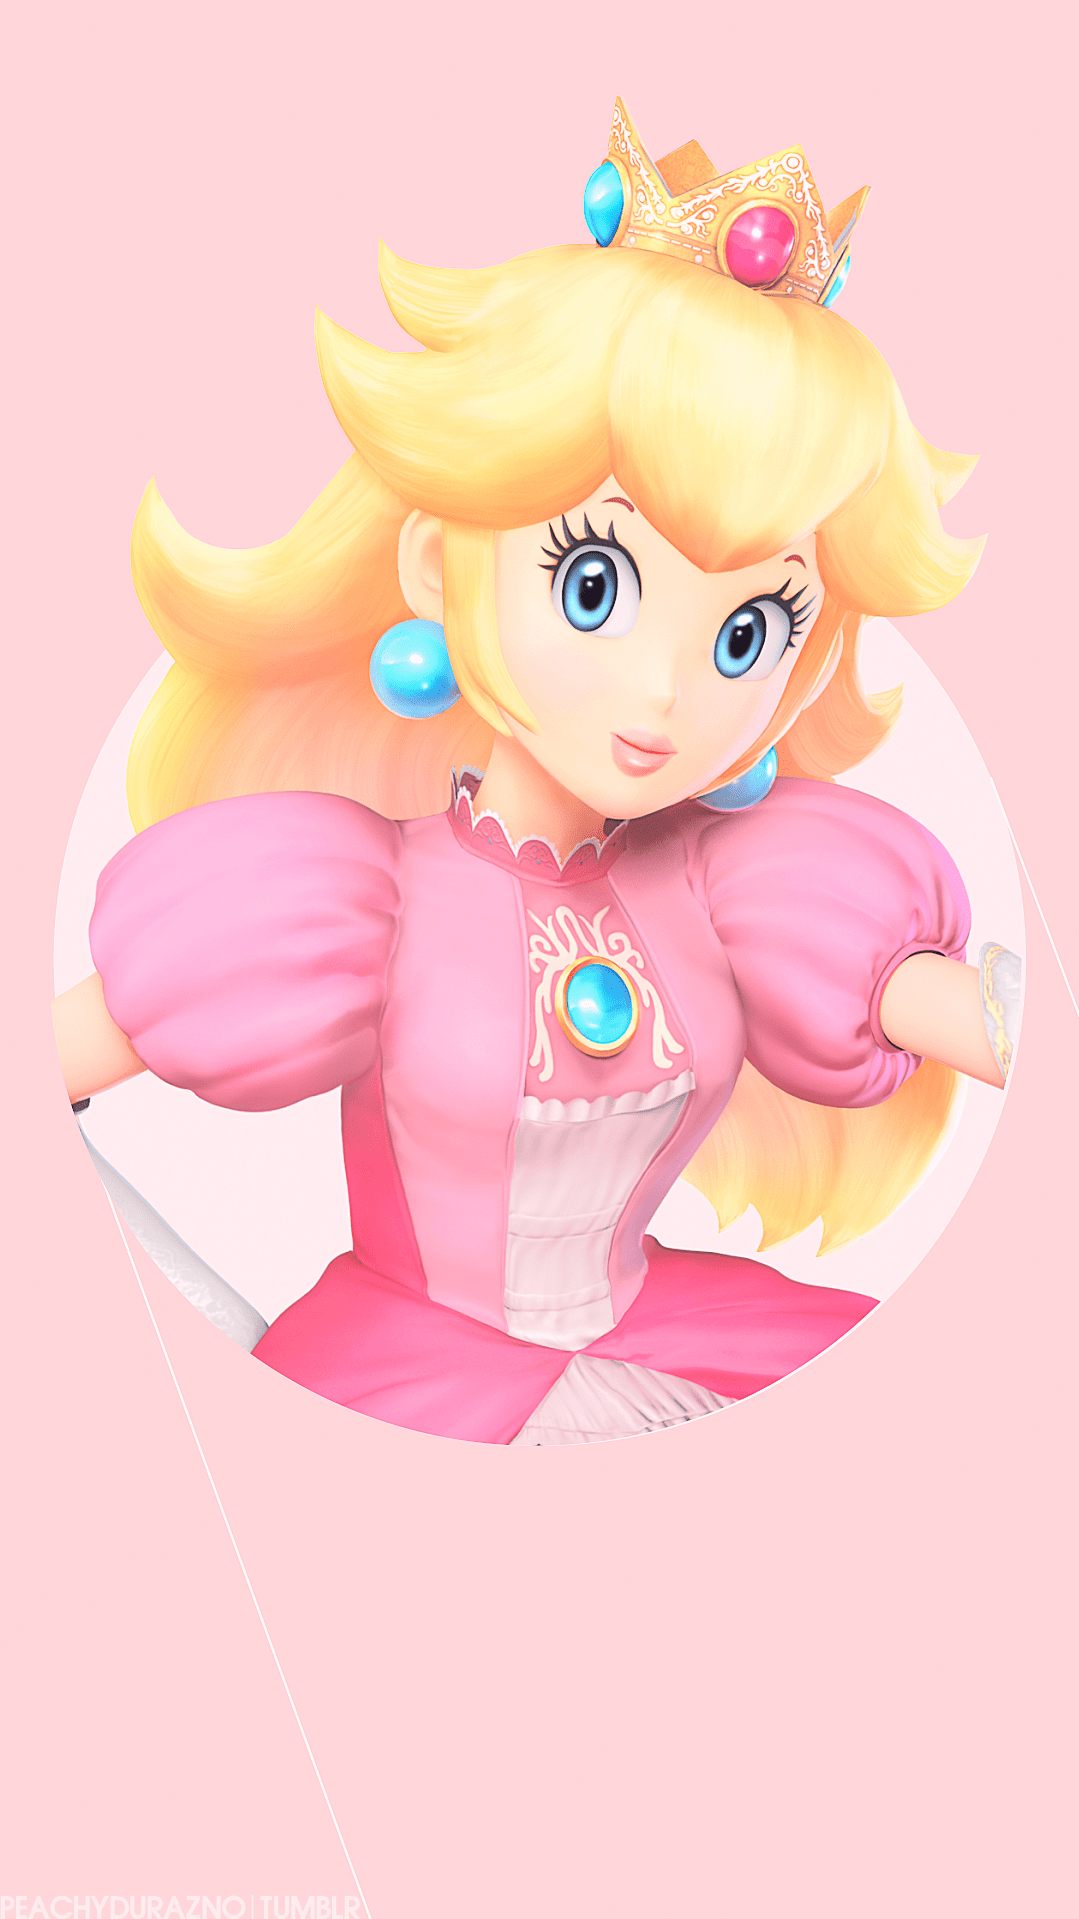 Peach in her new outfit - Princess Peach